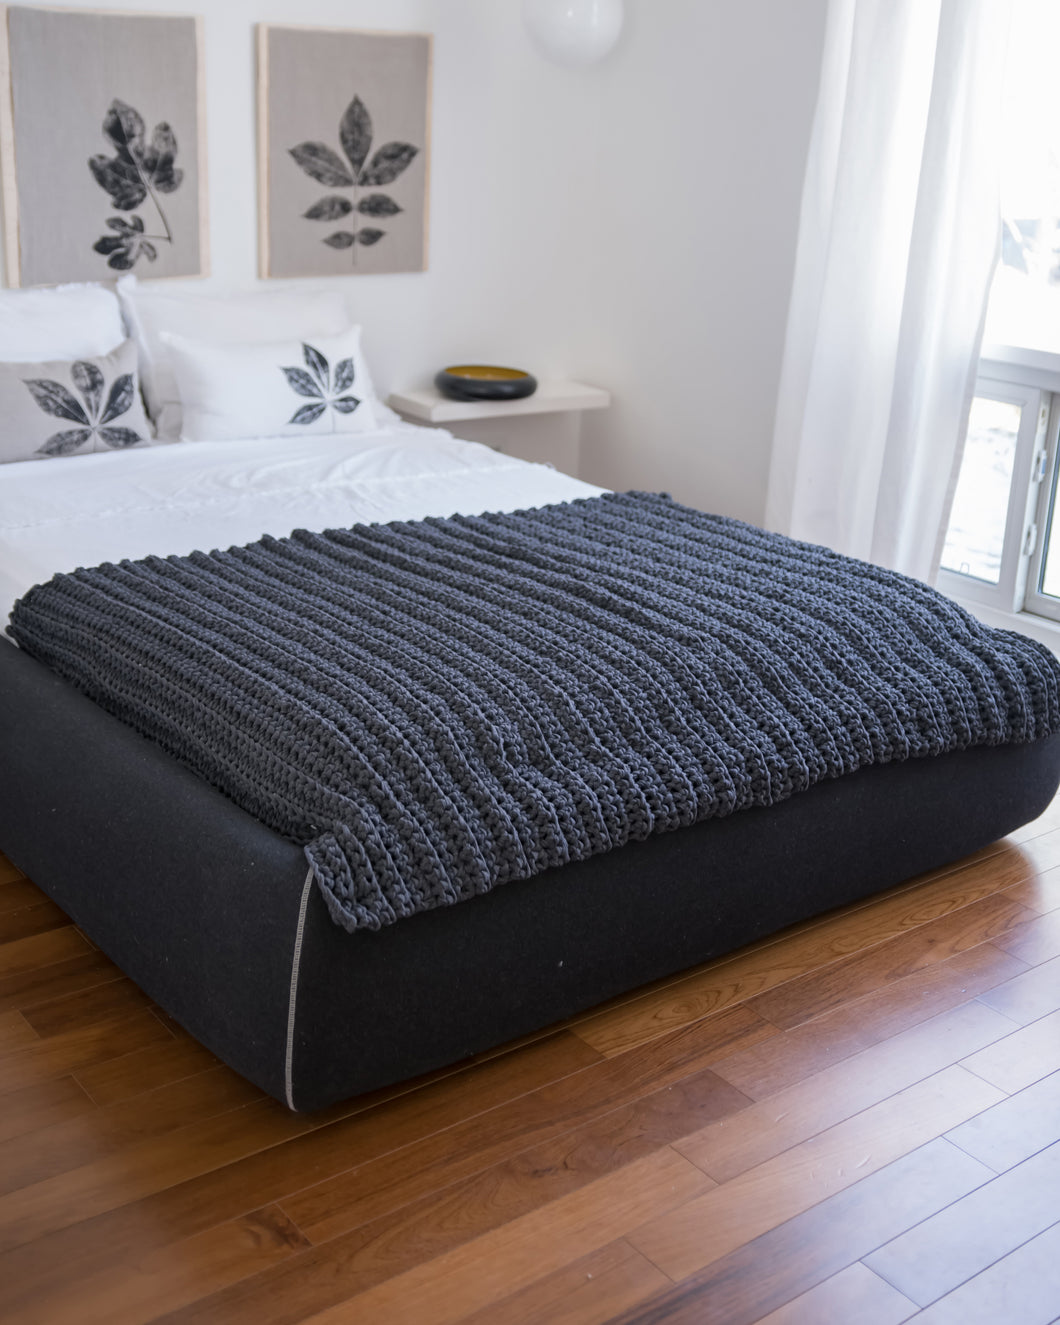 Hand-Crocheted Weighted Blanket in Charcoal